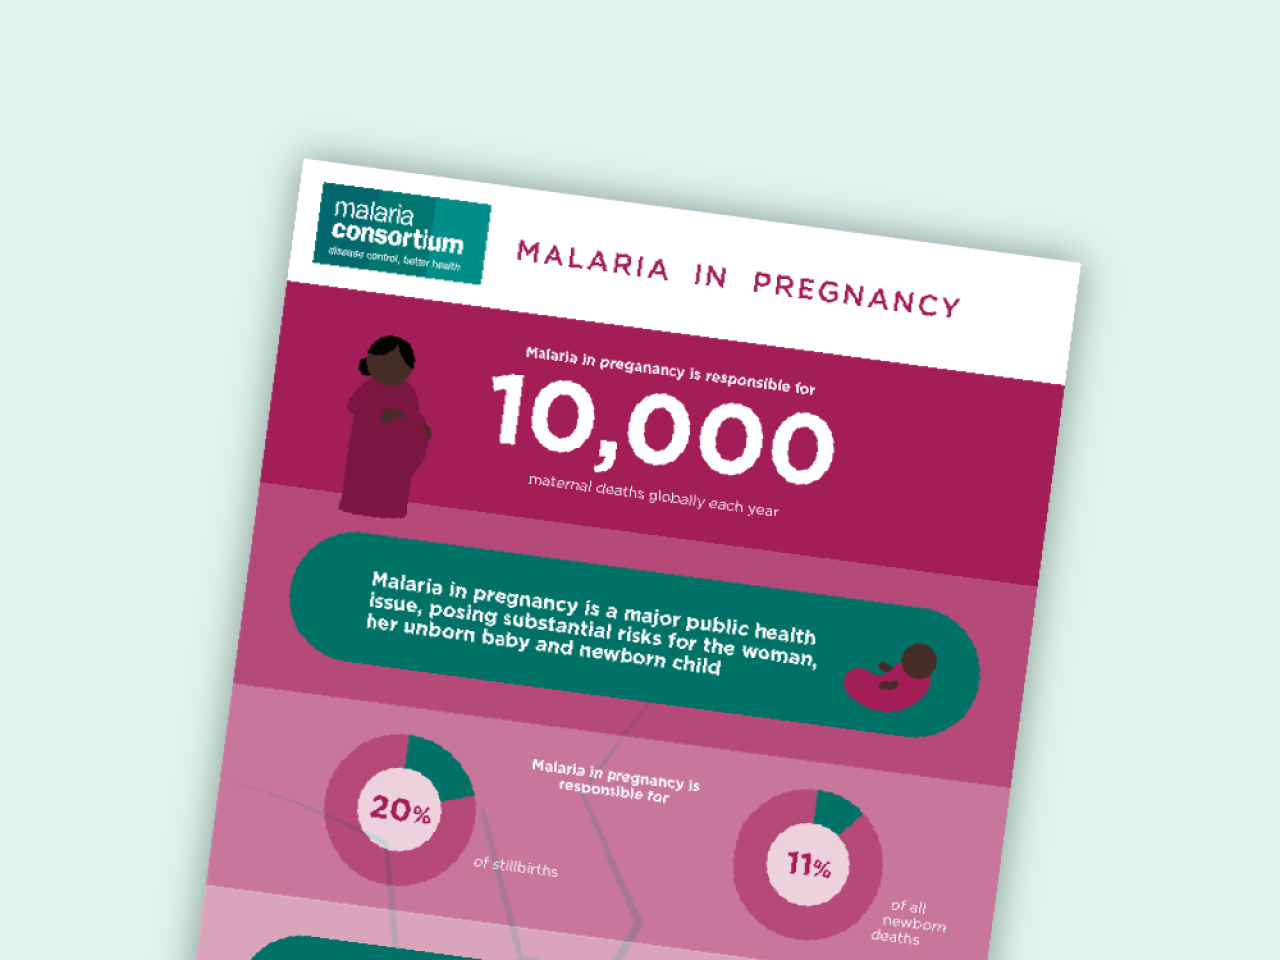 research questions on malaria in pregnancy